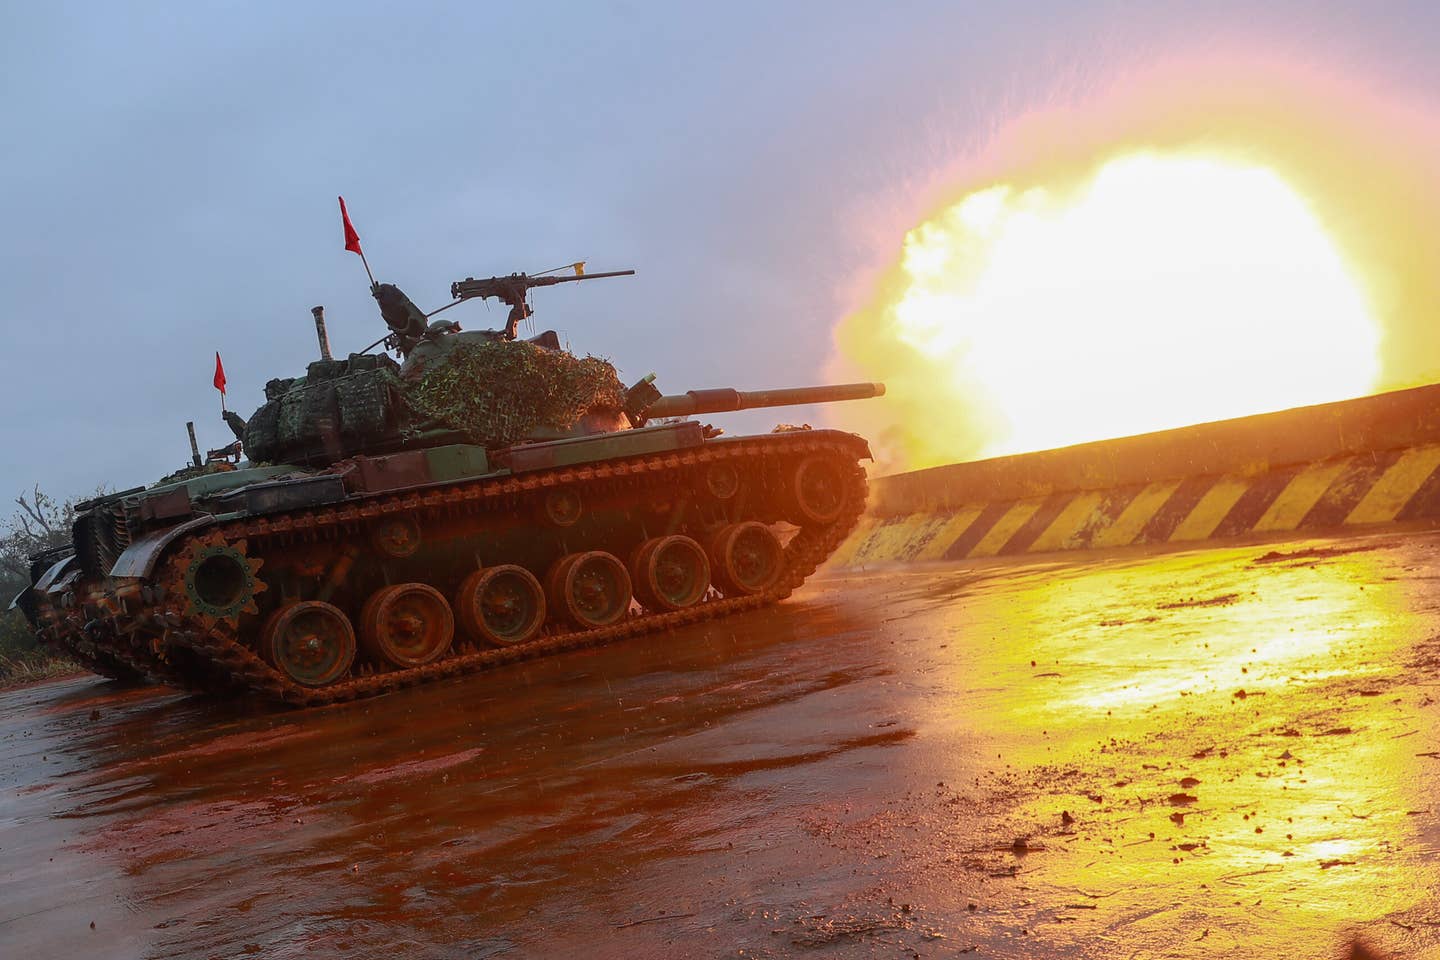 Taiwan is probably the only place in the Pacific where tanks will play a role, says Marine Lt. Gen. Karsten Heckl. (Photo by Ceng Shou Yi/NurPhoto via Getty Images)